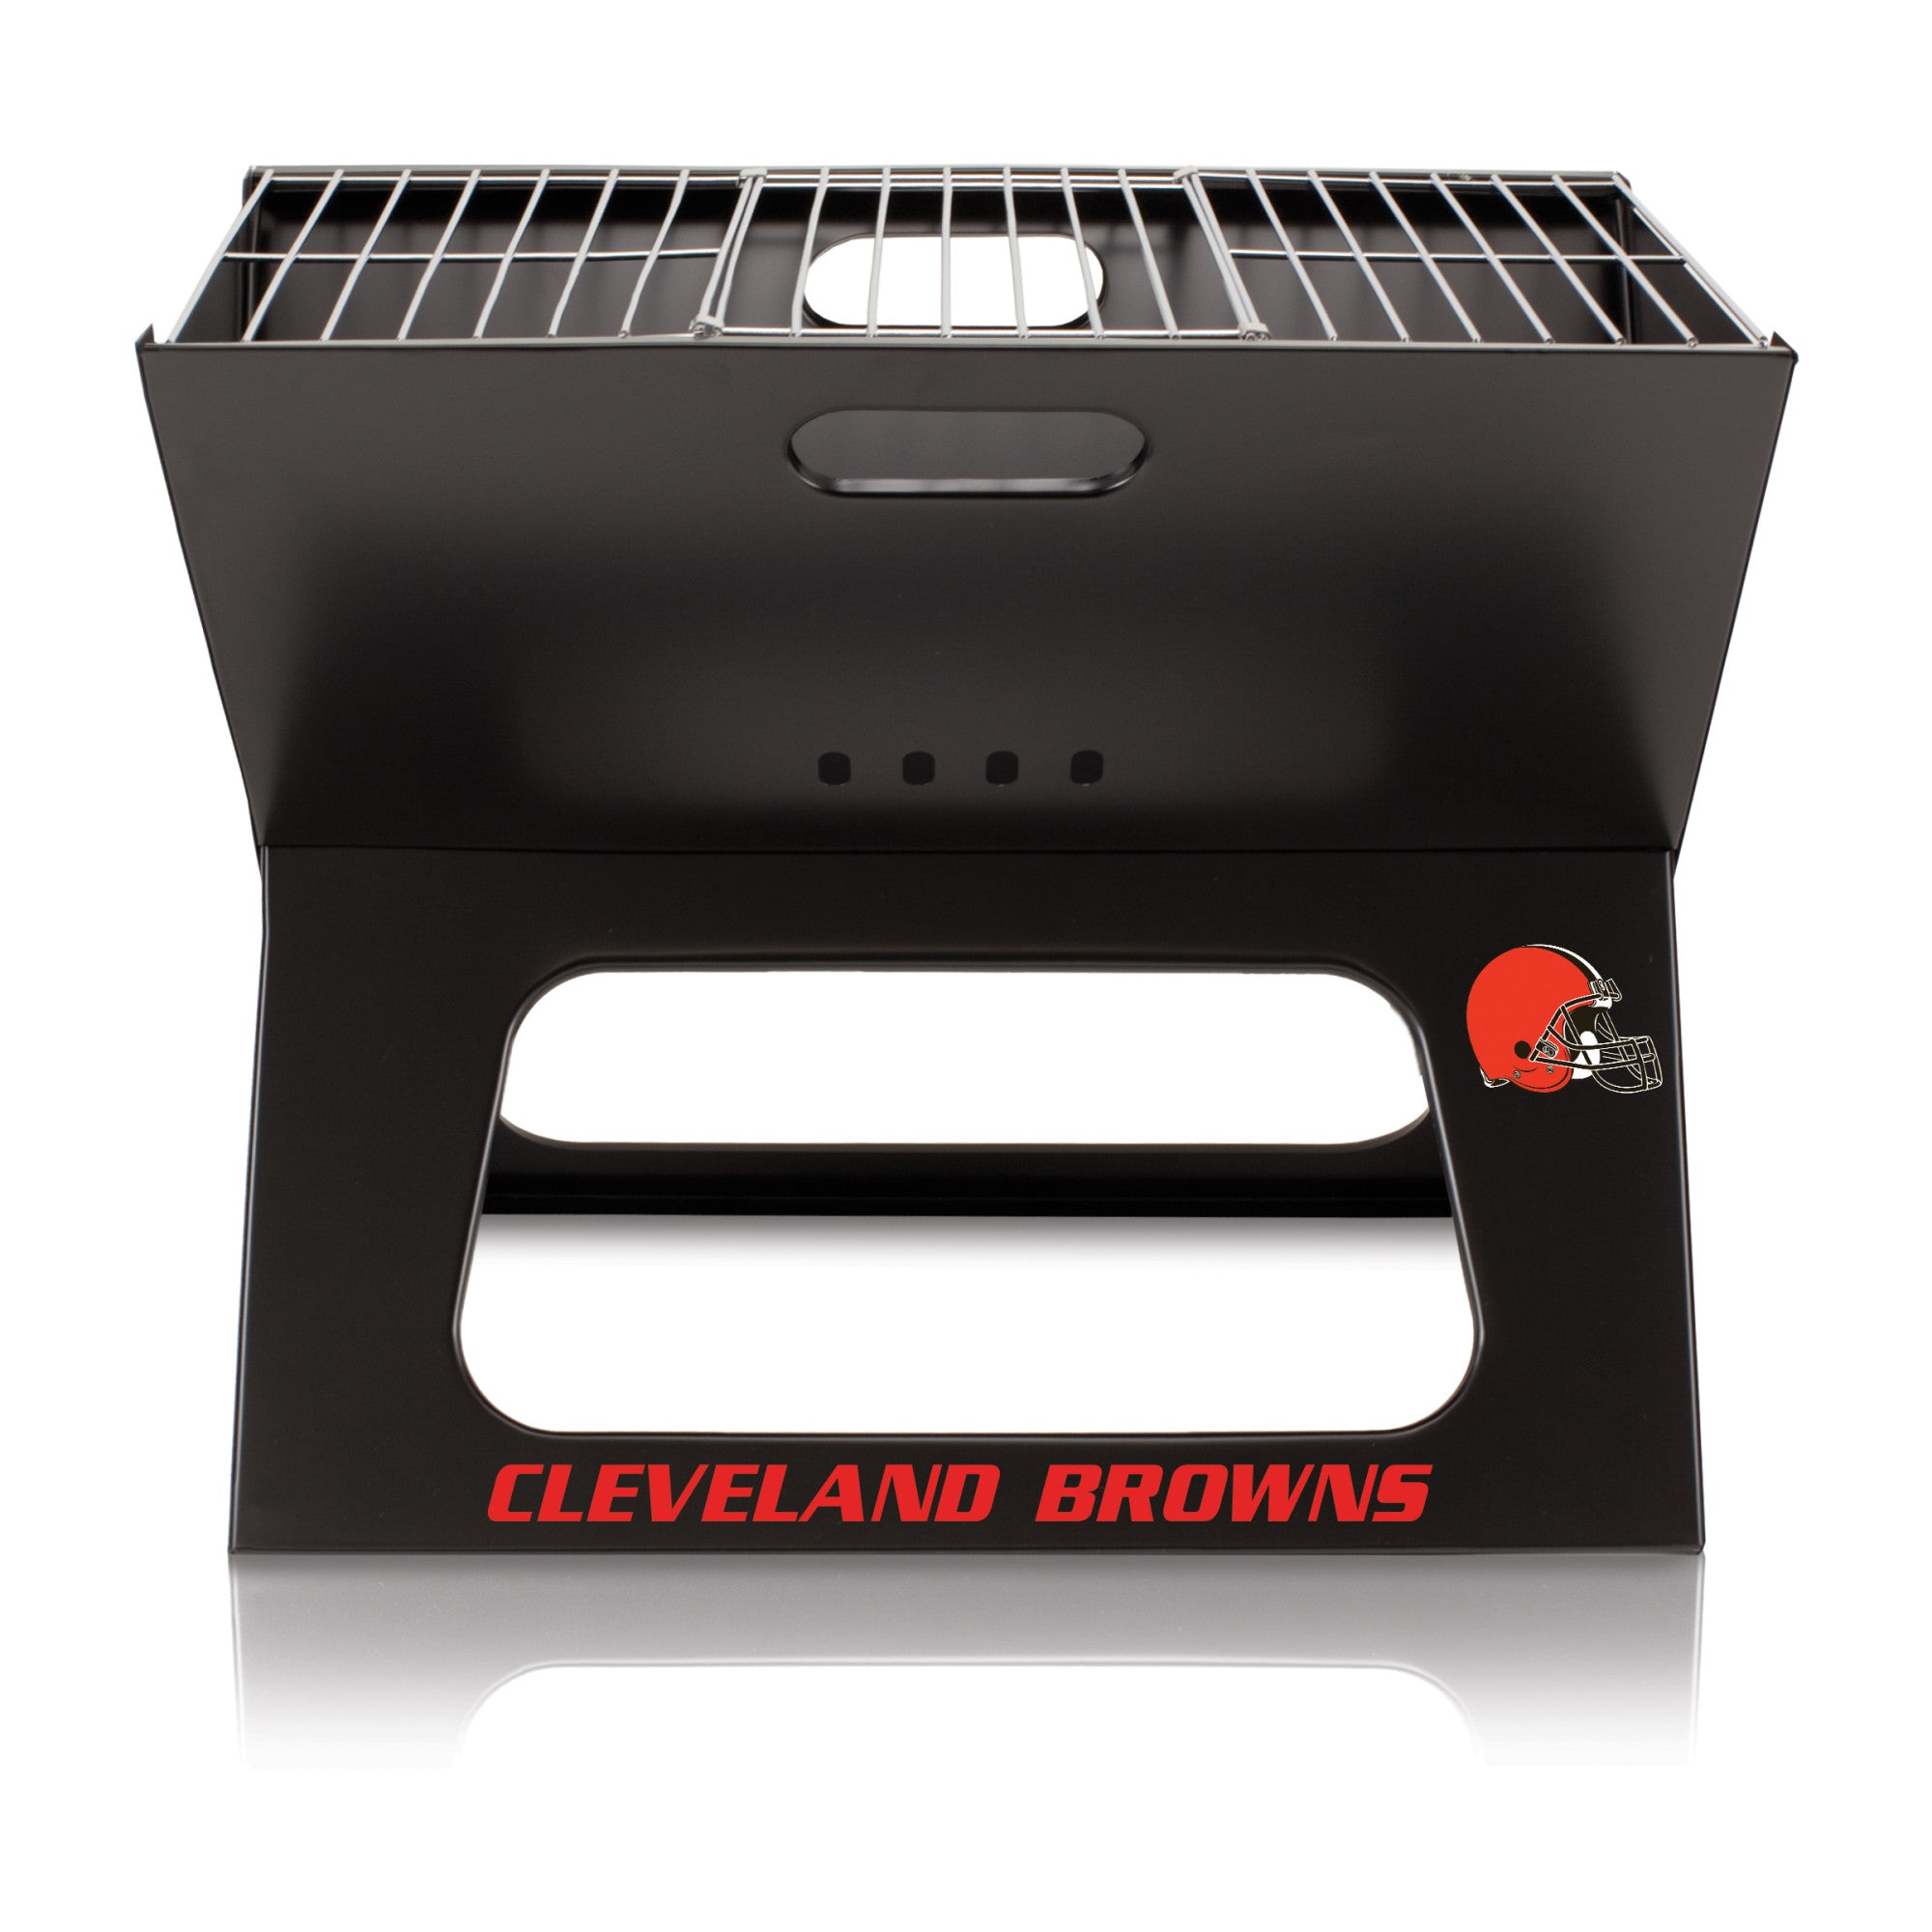 Cleveland Browns - X-Grill Portable Charcoal BBQ Grill